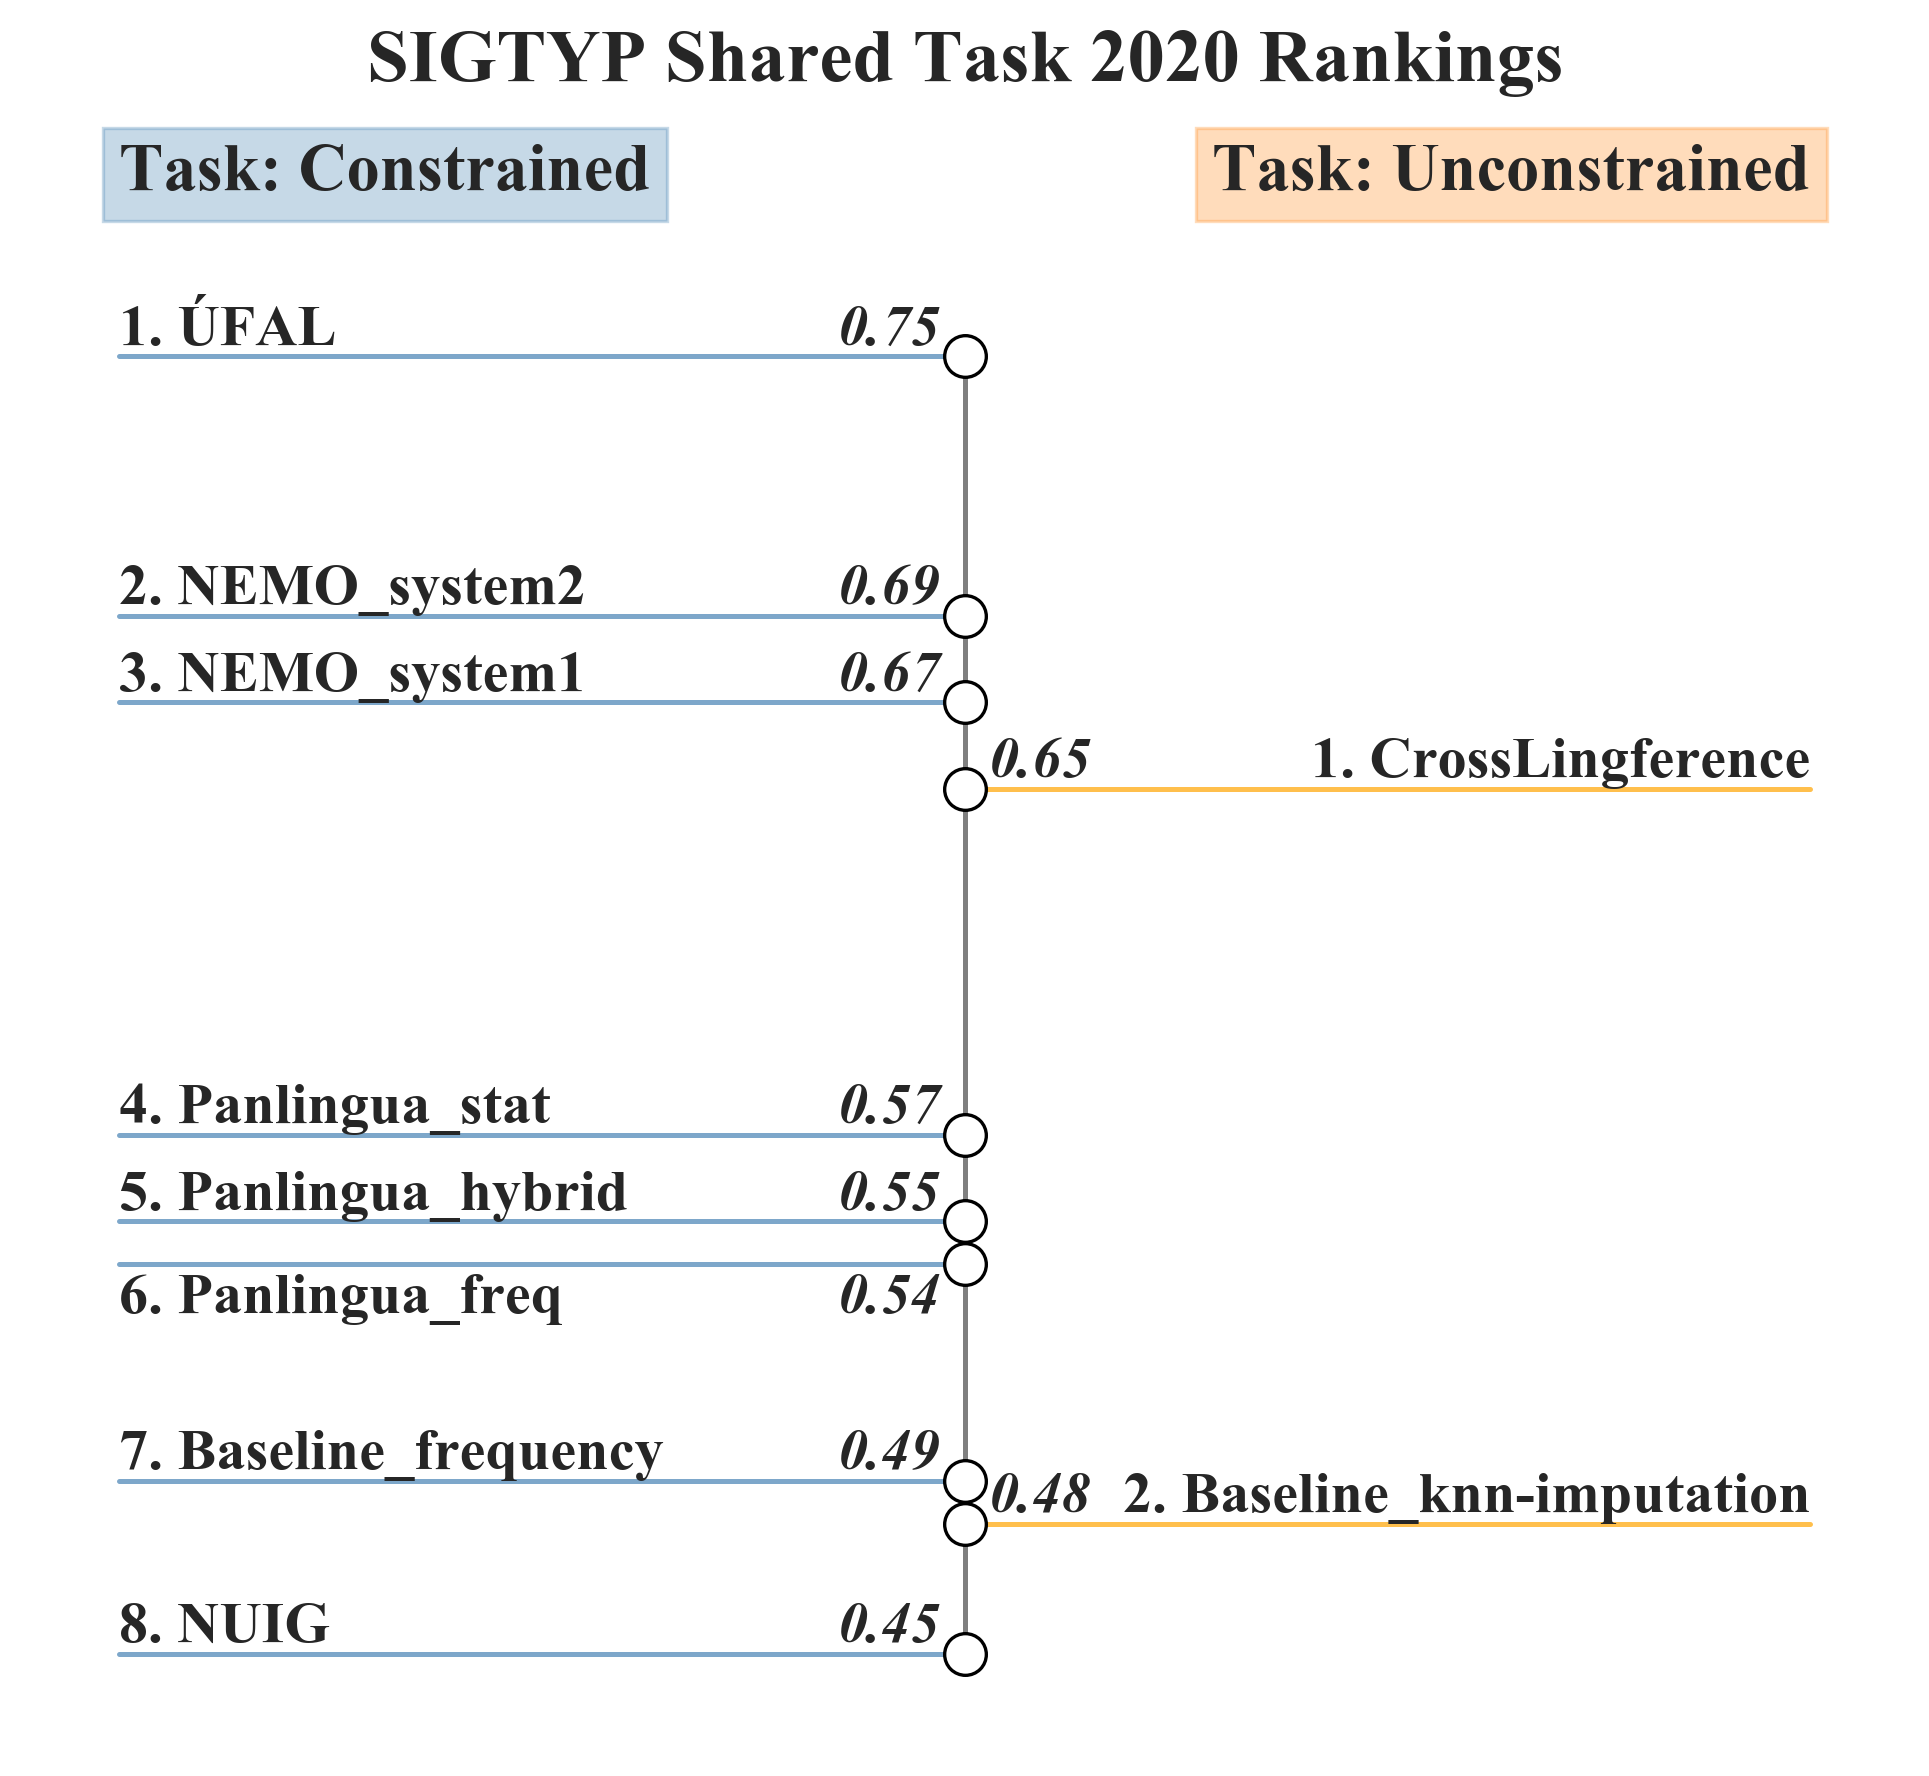 SIGTYP Shared Task 2020 Rankings